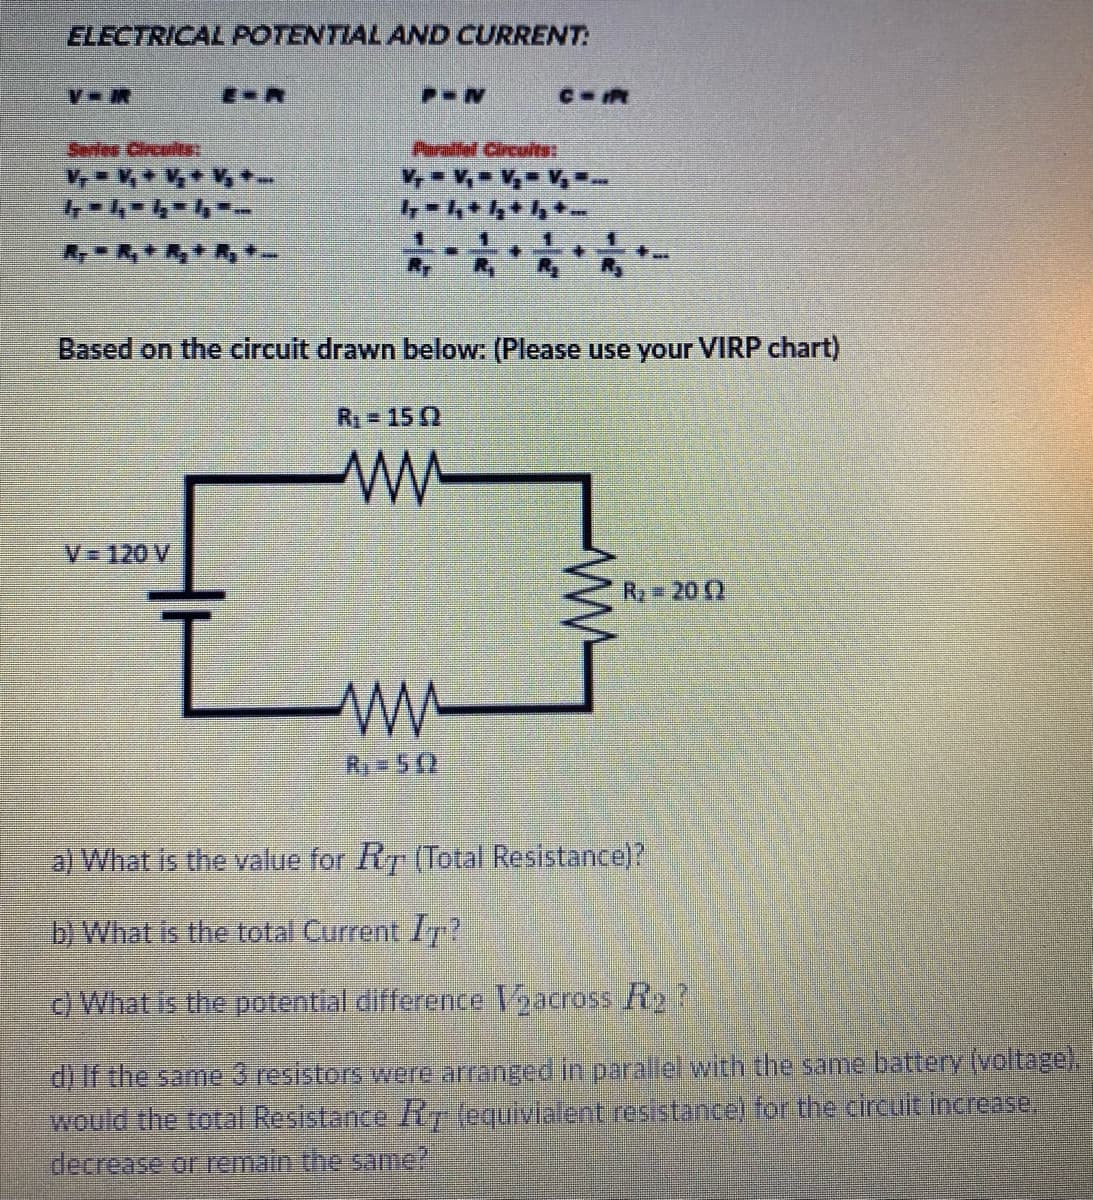 ELECTRICAL POTENTIAL AND CURRENT:
E-R
Series Circult
Parallel Circuits:
Based on the circuit drawn below: (Please use your VIRP chart)
R = 15 2
V=120 V
R 20
R 5(2
a) What is the value for Ry (Total Resistance)?
b) What is the total Current Ir?
) What is the potential difference Vacross R2?
d) If the same 3 resistors were arranged in parallel with the same battery (voltage).
would the total Resistance Rfequivialent resistance) for the circult increase.
decrease or remain the same?
